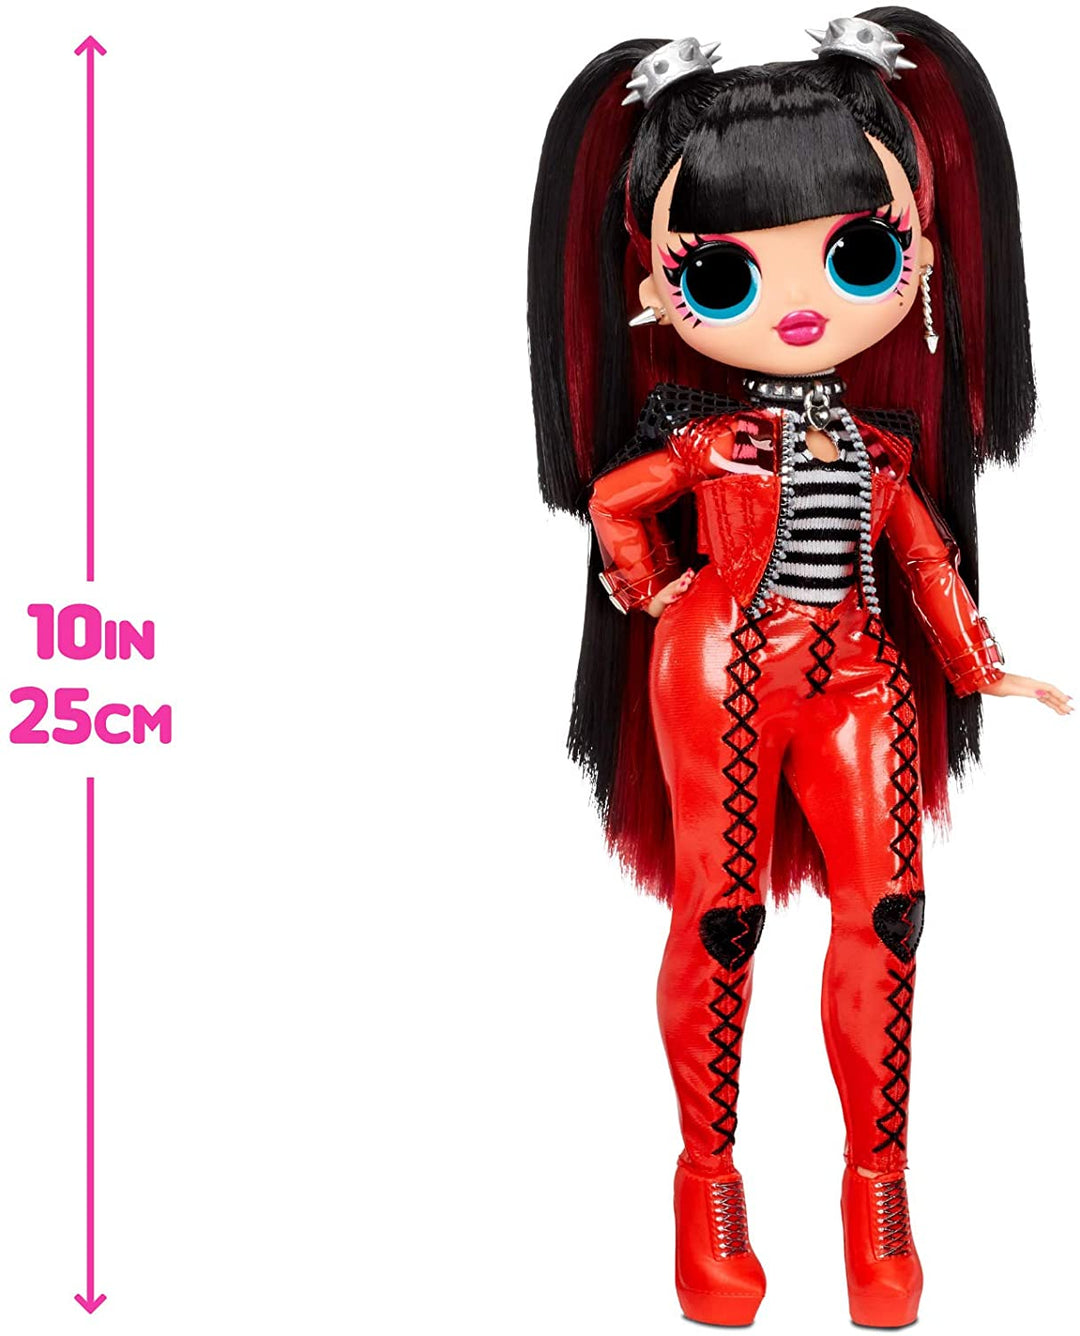 LOL Surprise OMG SPICY BABE Fashion Doll, With 20 Surprises, Designer Clothes, Glamourous Outfits, And Fashionable Accessories. LOL Surprise OMG Series 4. Collectable Doll for Boys And Girls Age 4+